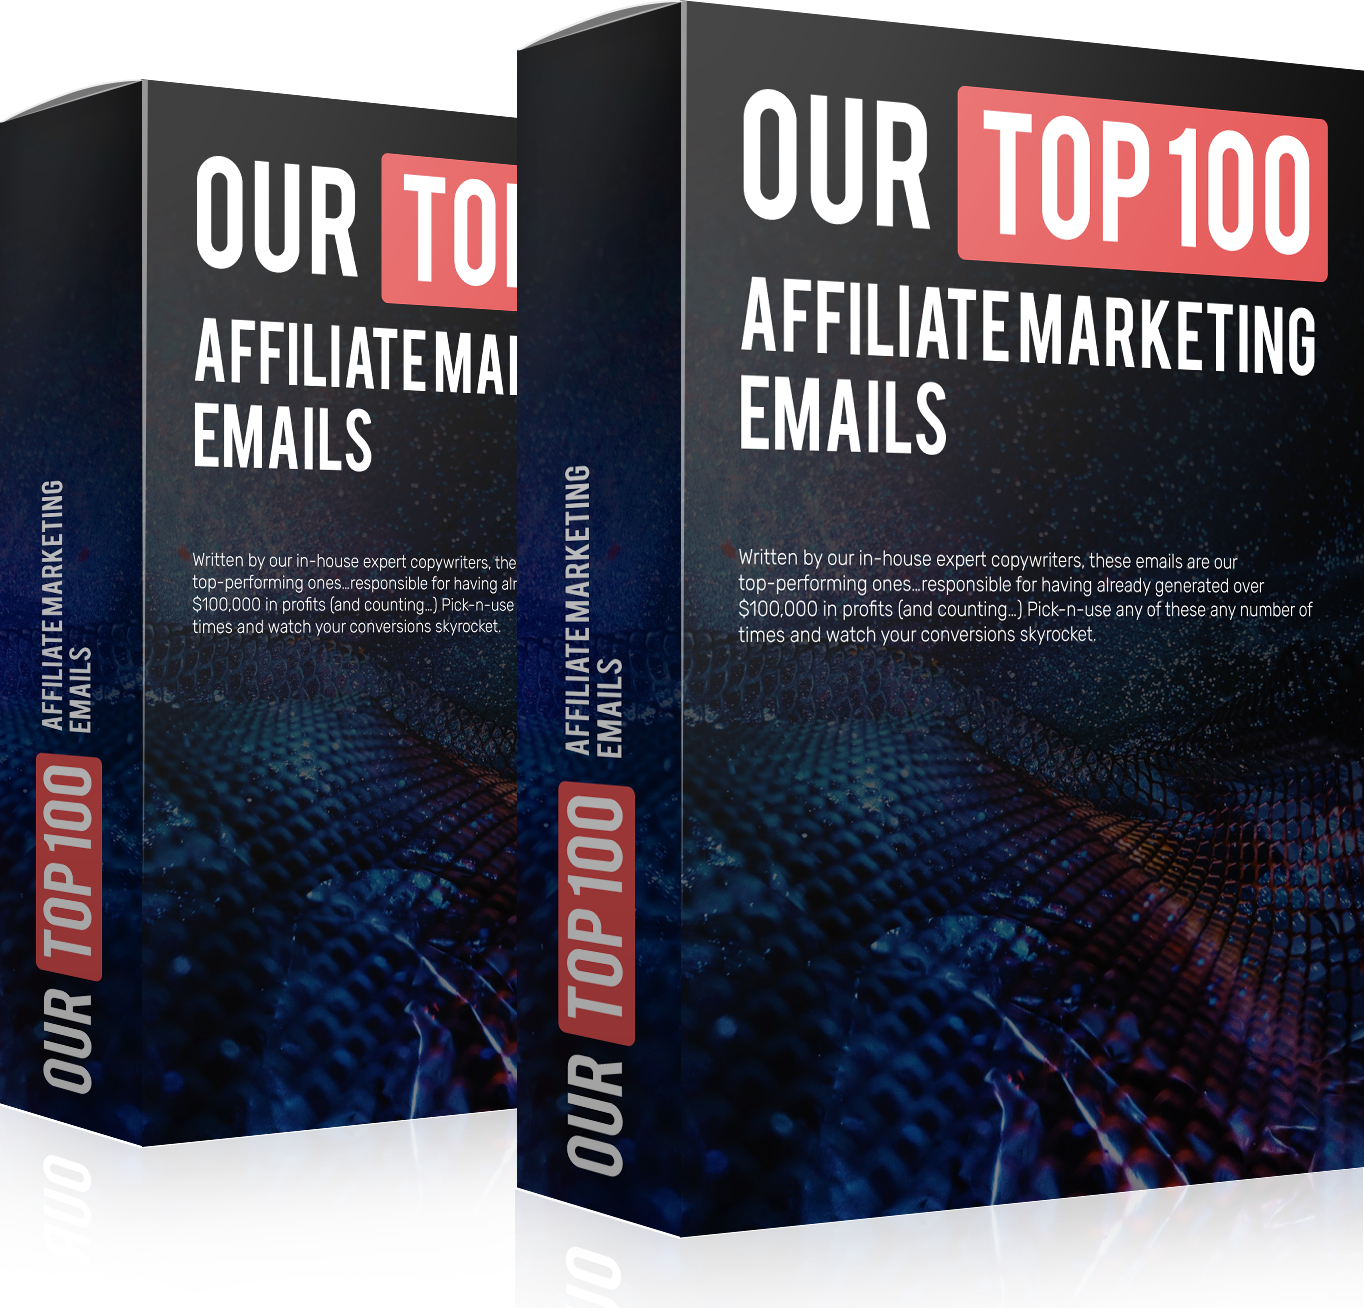 Our Top 100 Affiliate Marketing Emails